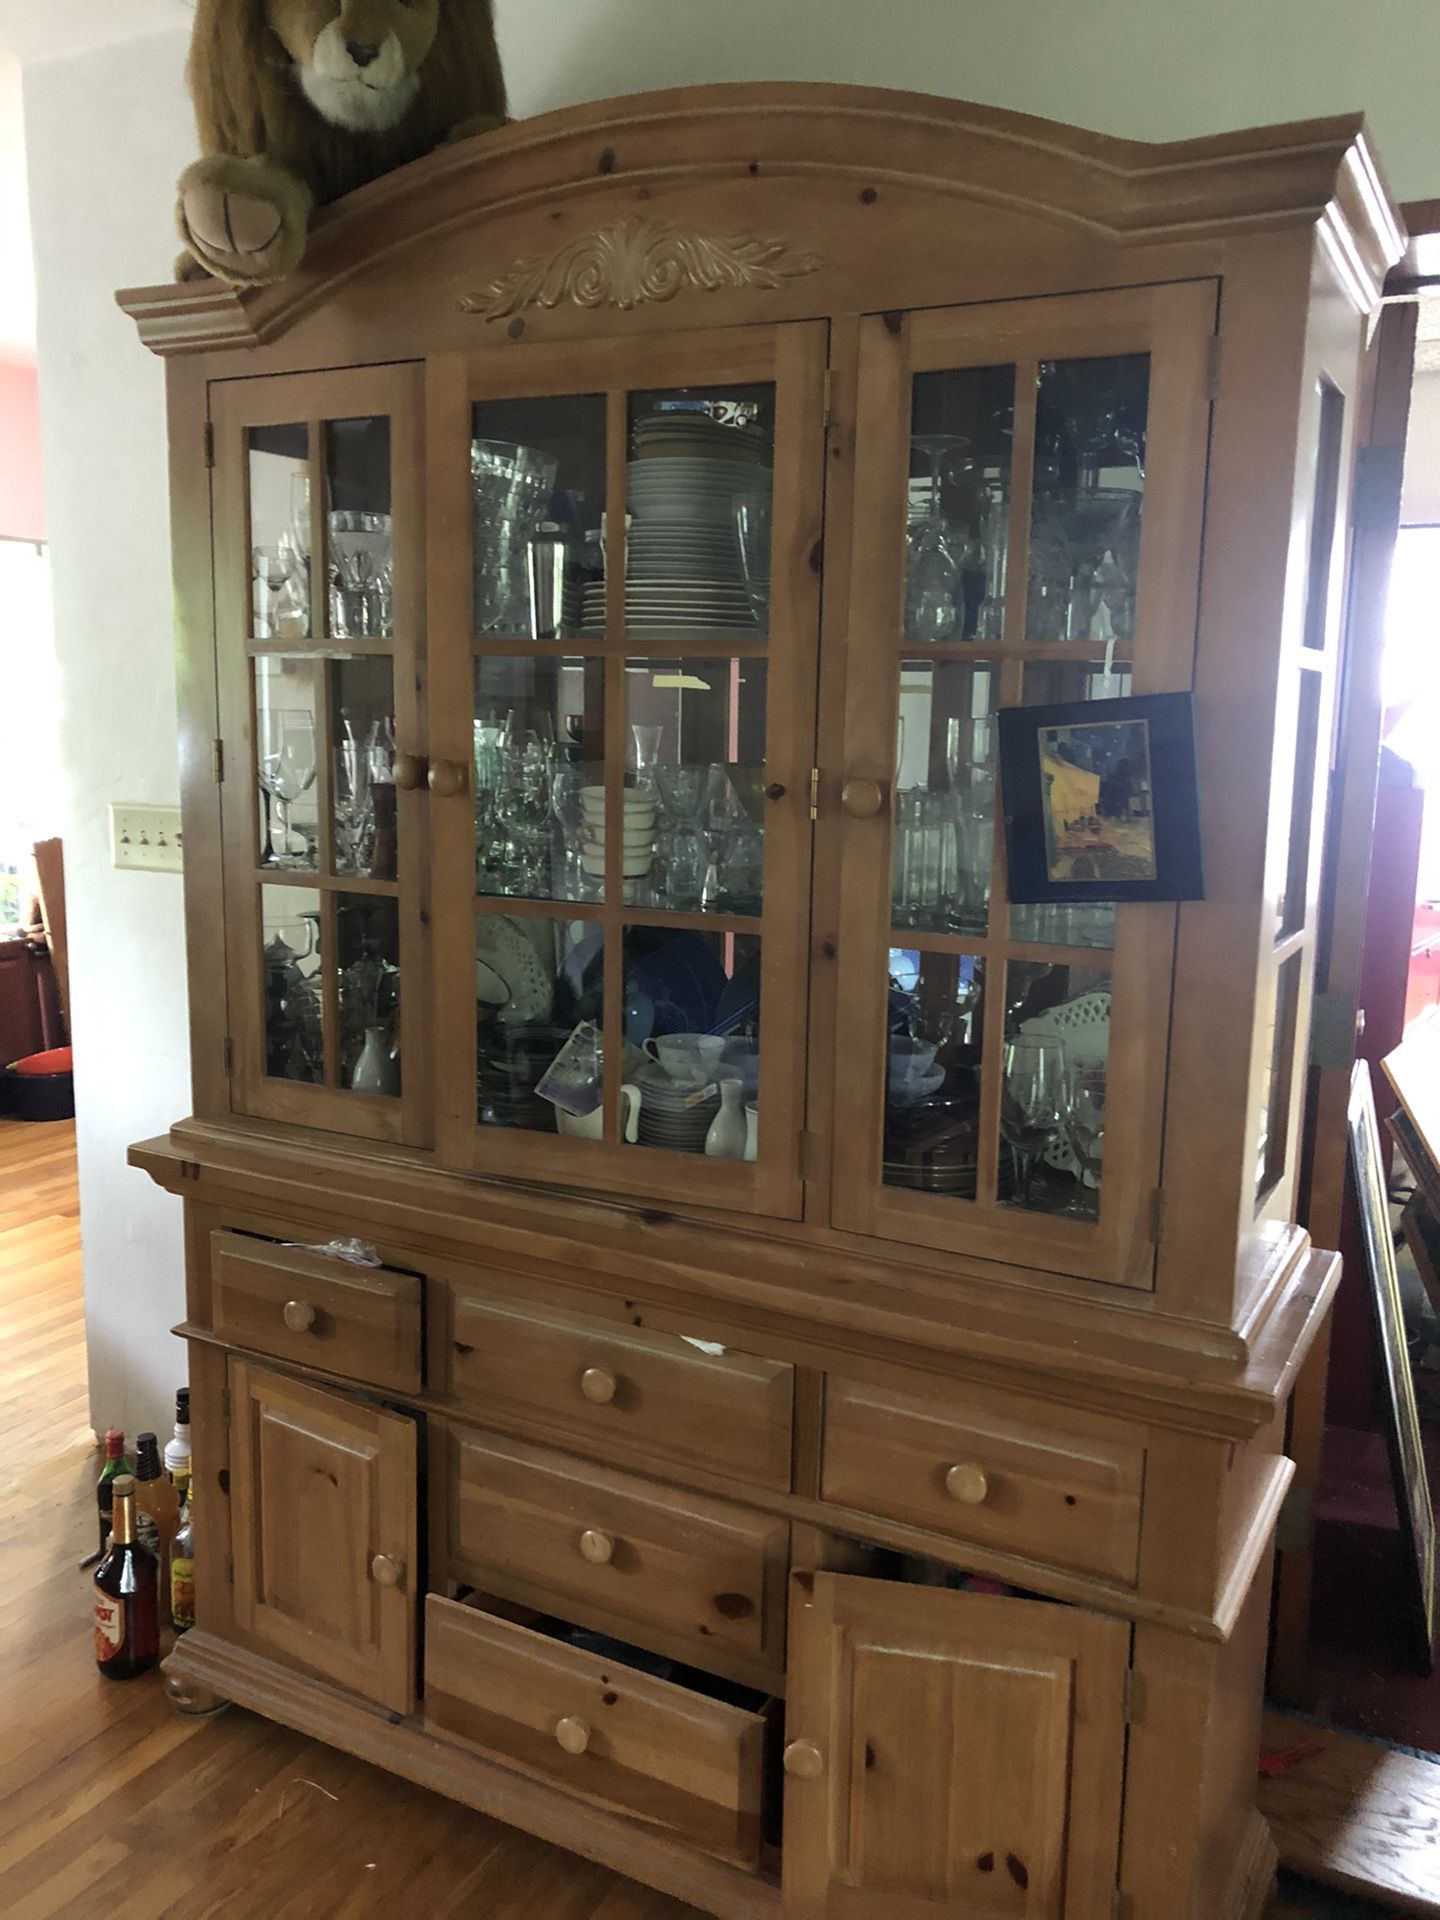 China cabinet, couch,recliners, wine rack